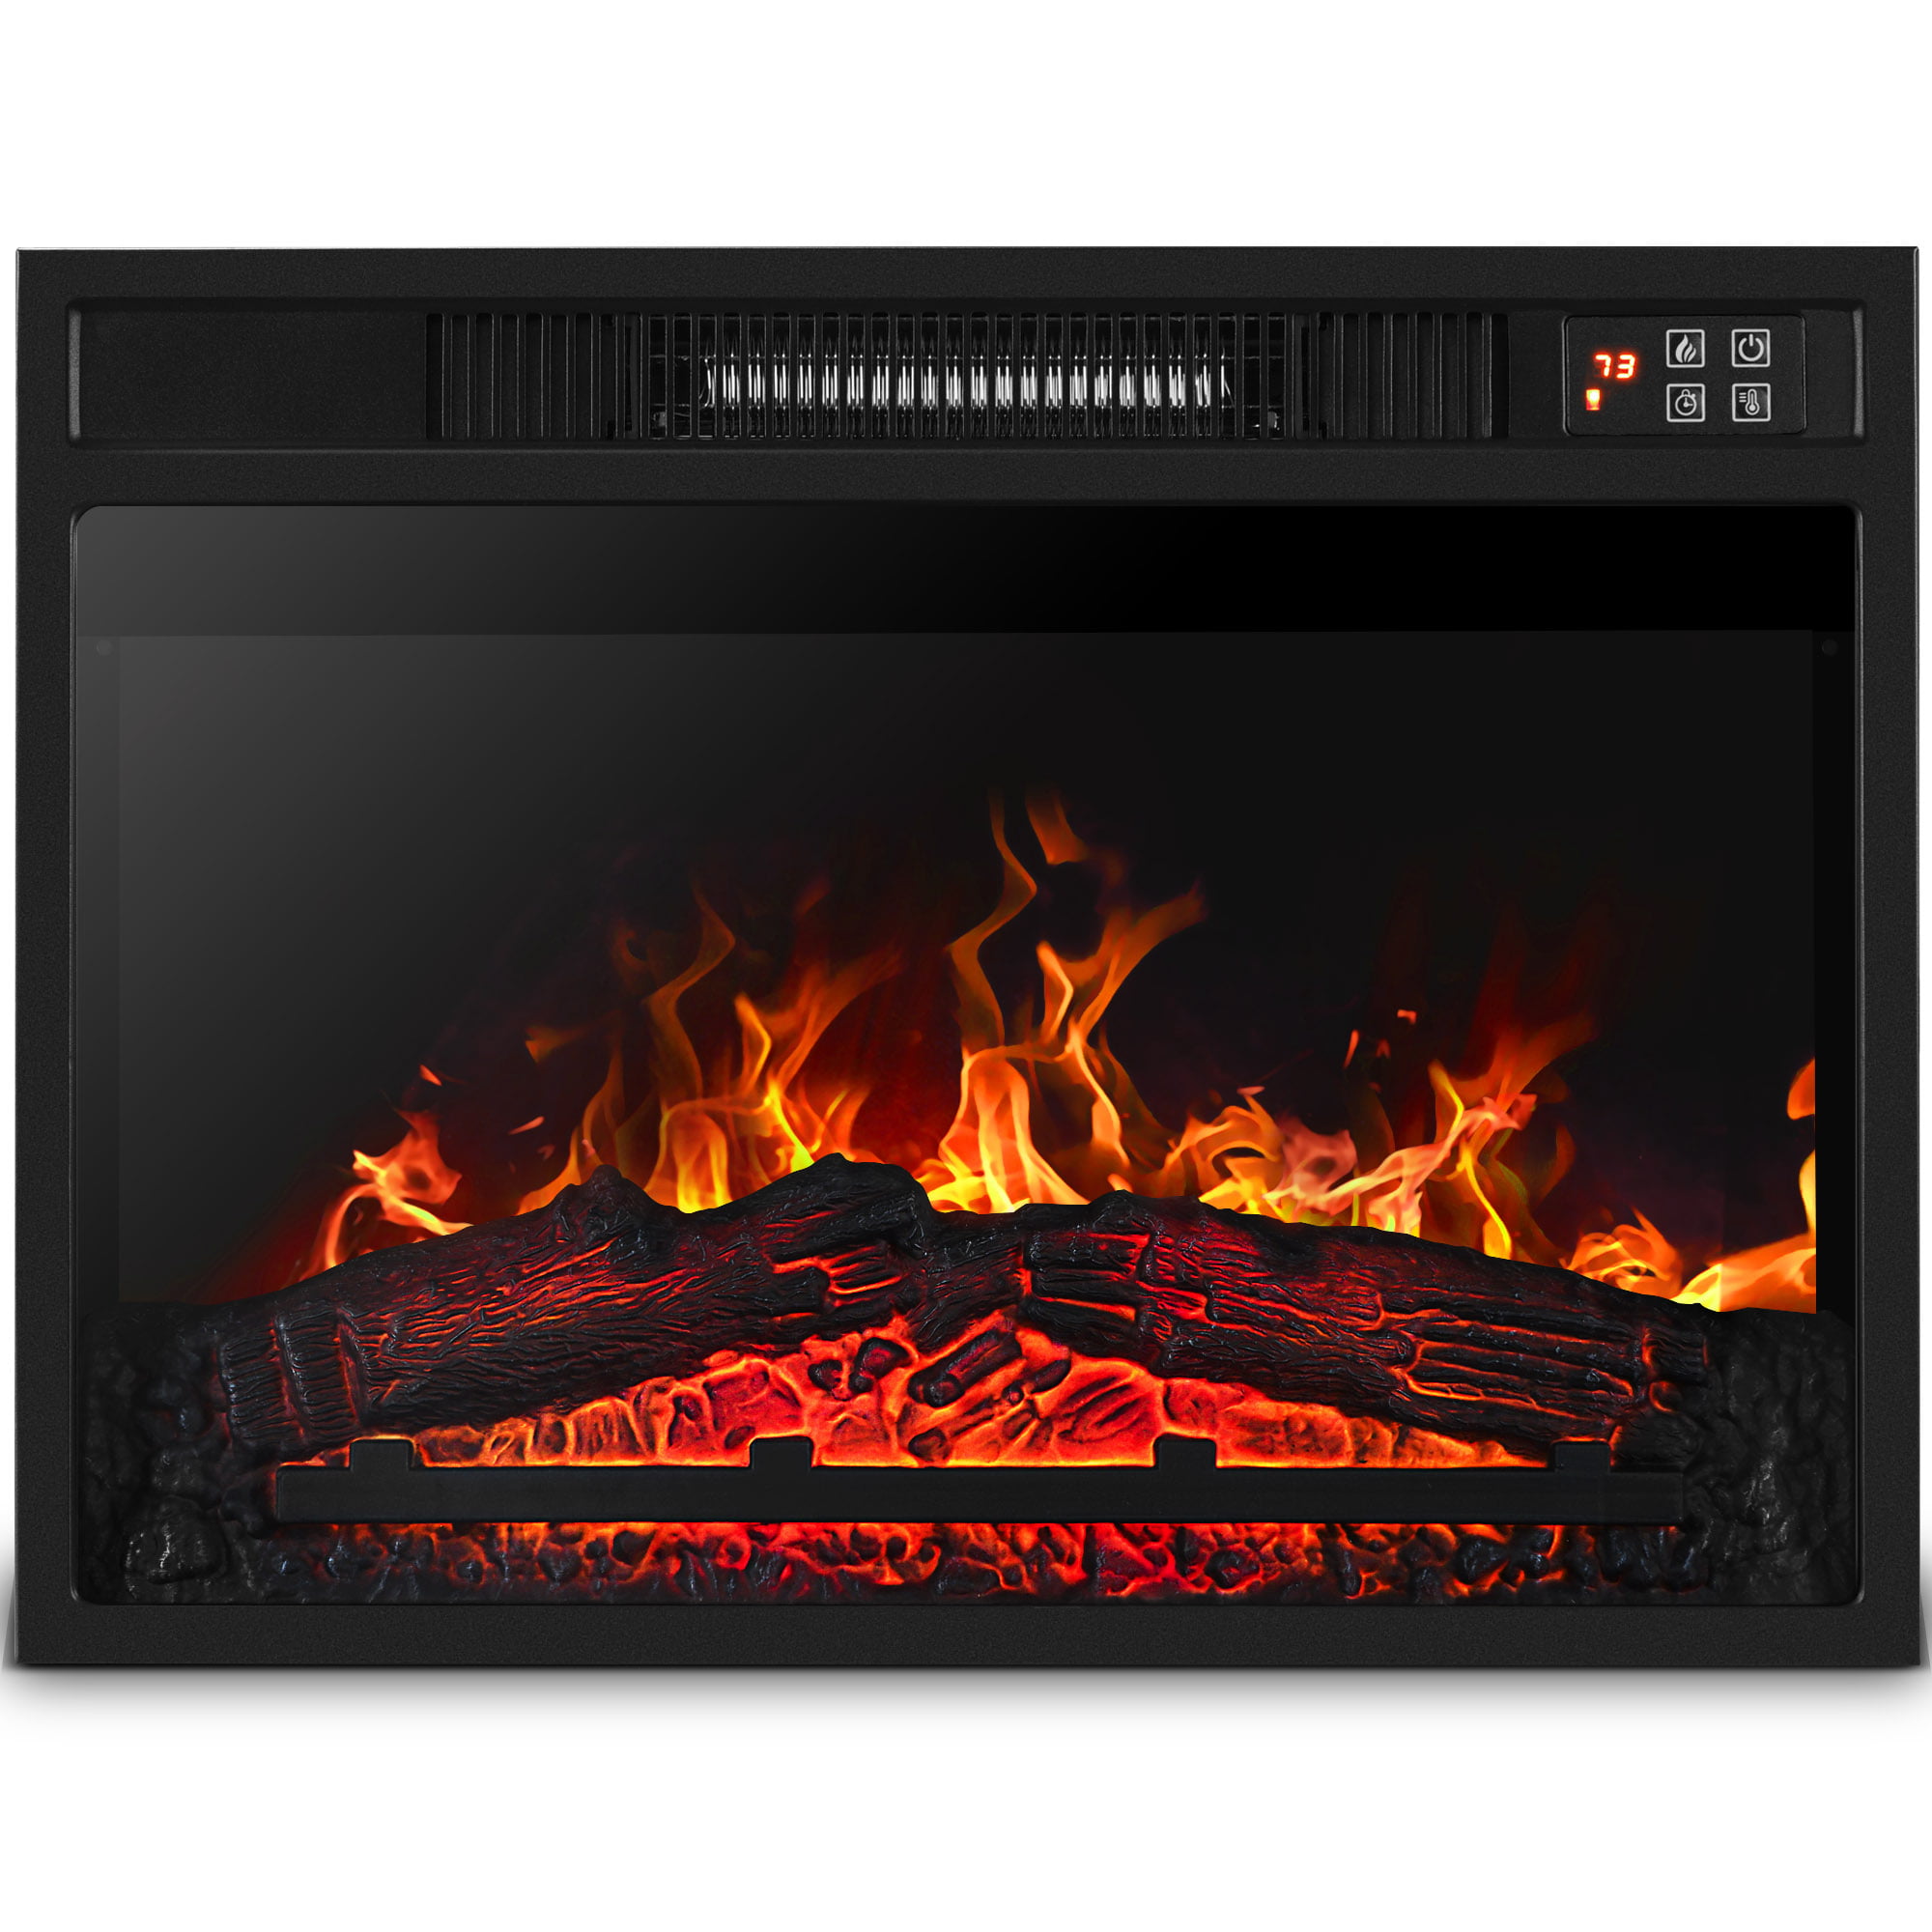 Black Retro Recessed Fireplace Heater with Fire Cracking Sound Masarflame 33 Electric Fireplace Insert 750/1500W Remote Control & Timer